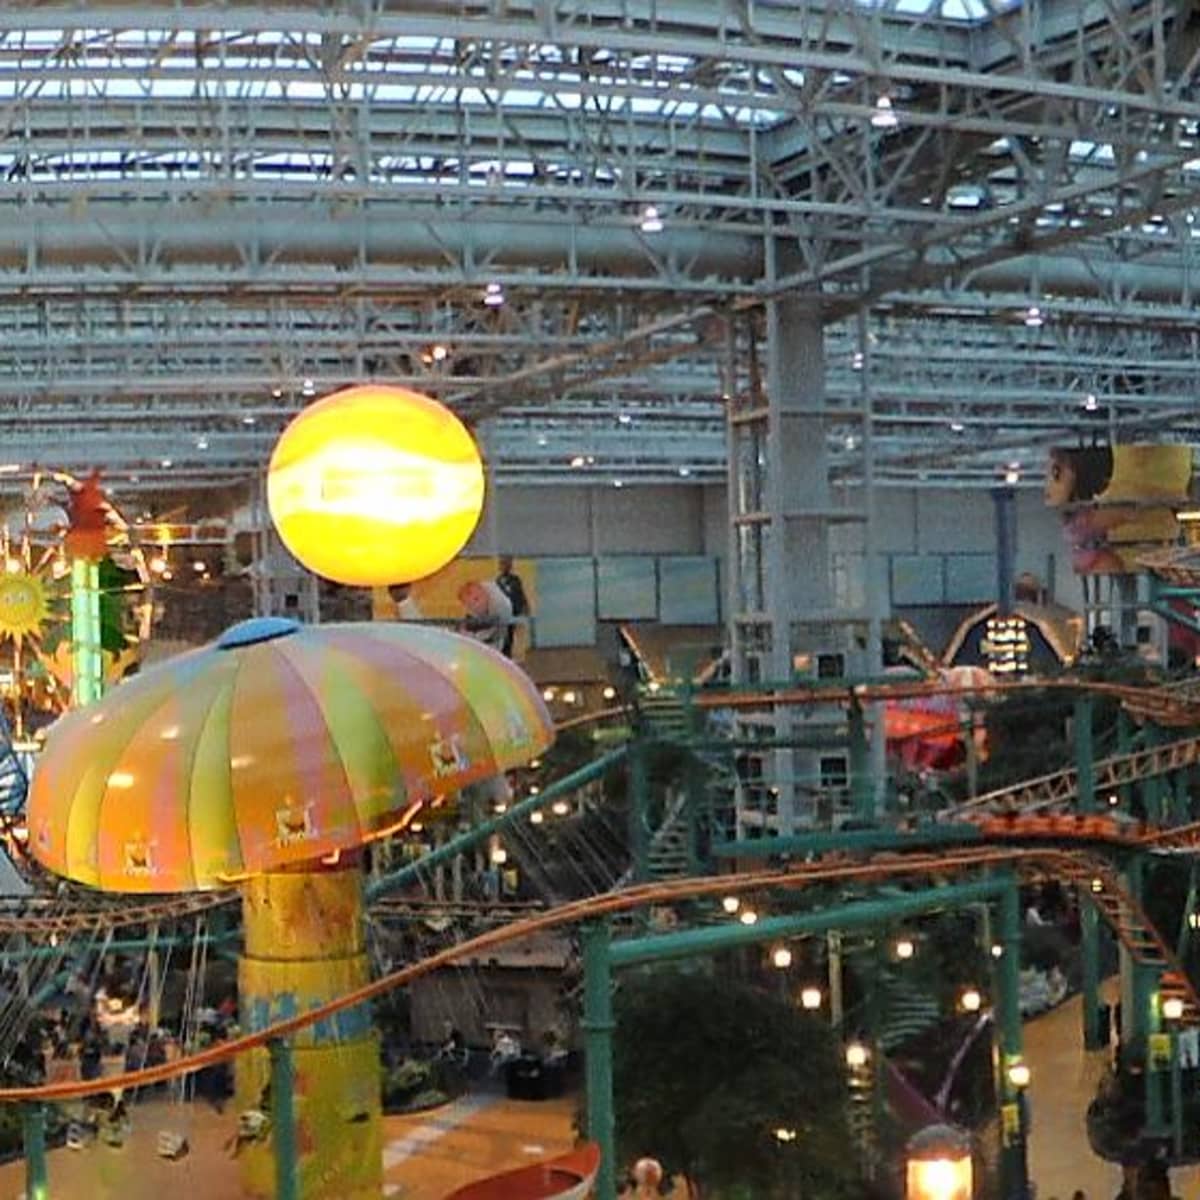 30 Fun Things to Do at Mall of America (Besides Shop!)